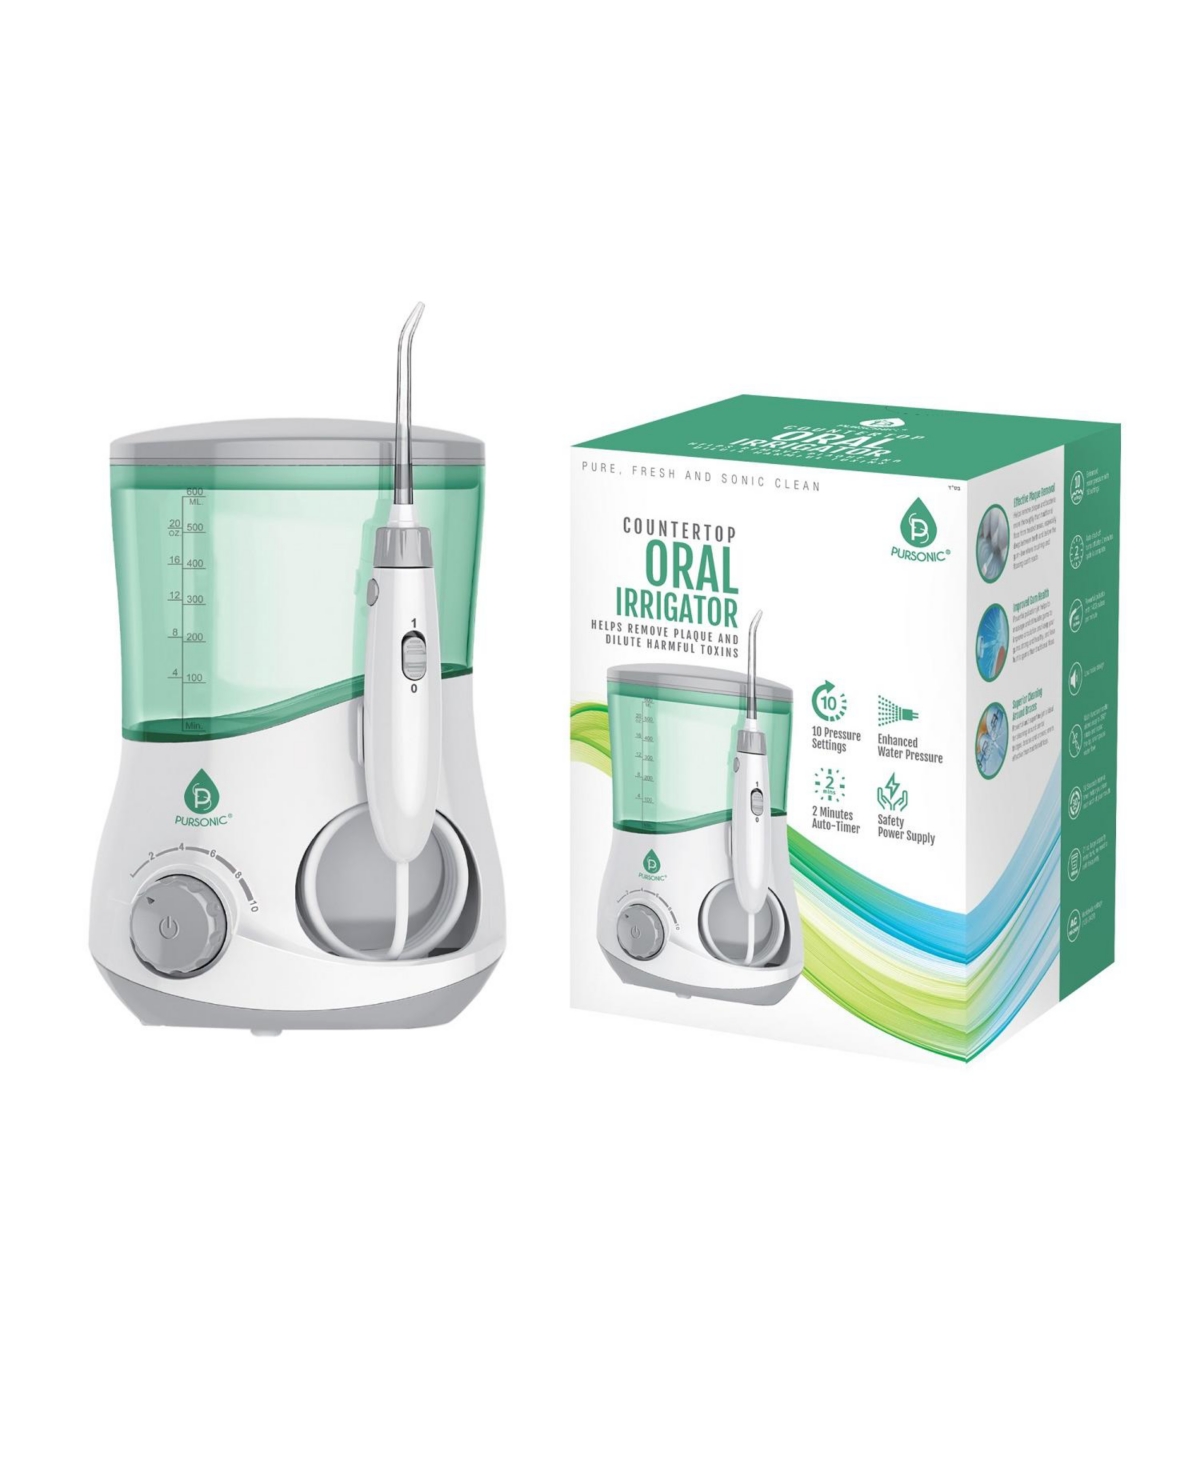 PURSONIC PROFESSIONAL COUNTER TOP ORAL IRRIGATOR WATER FLOSSER